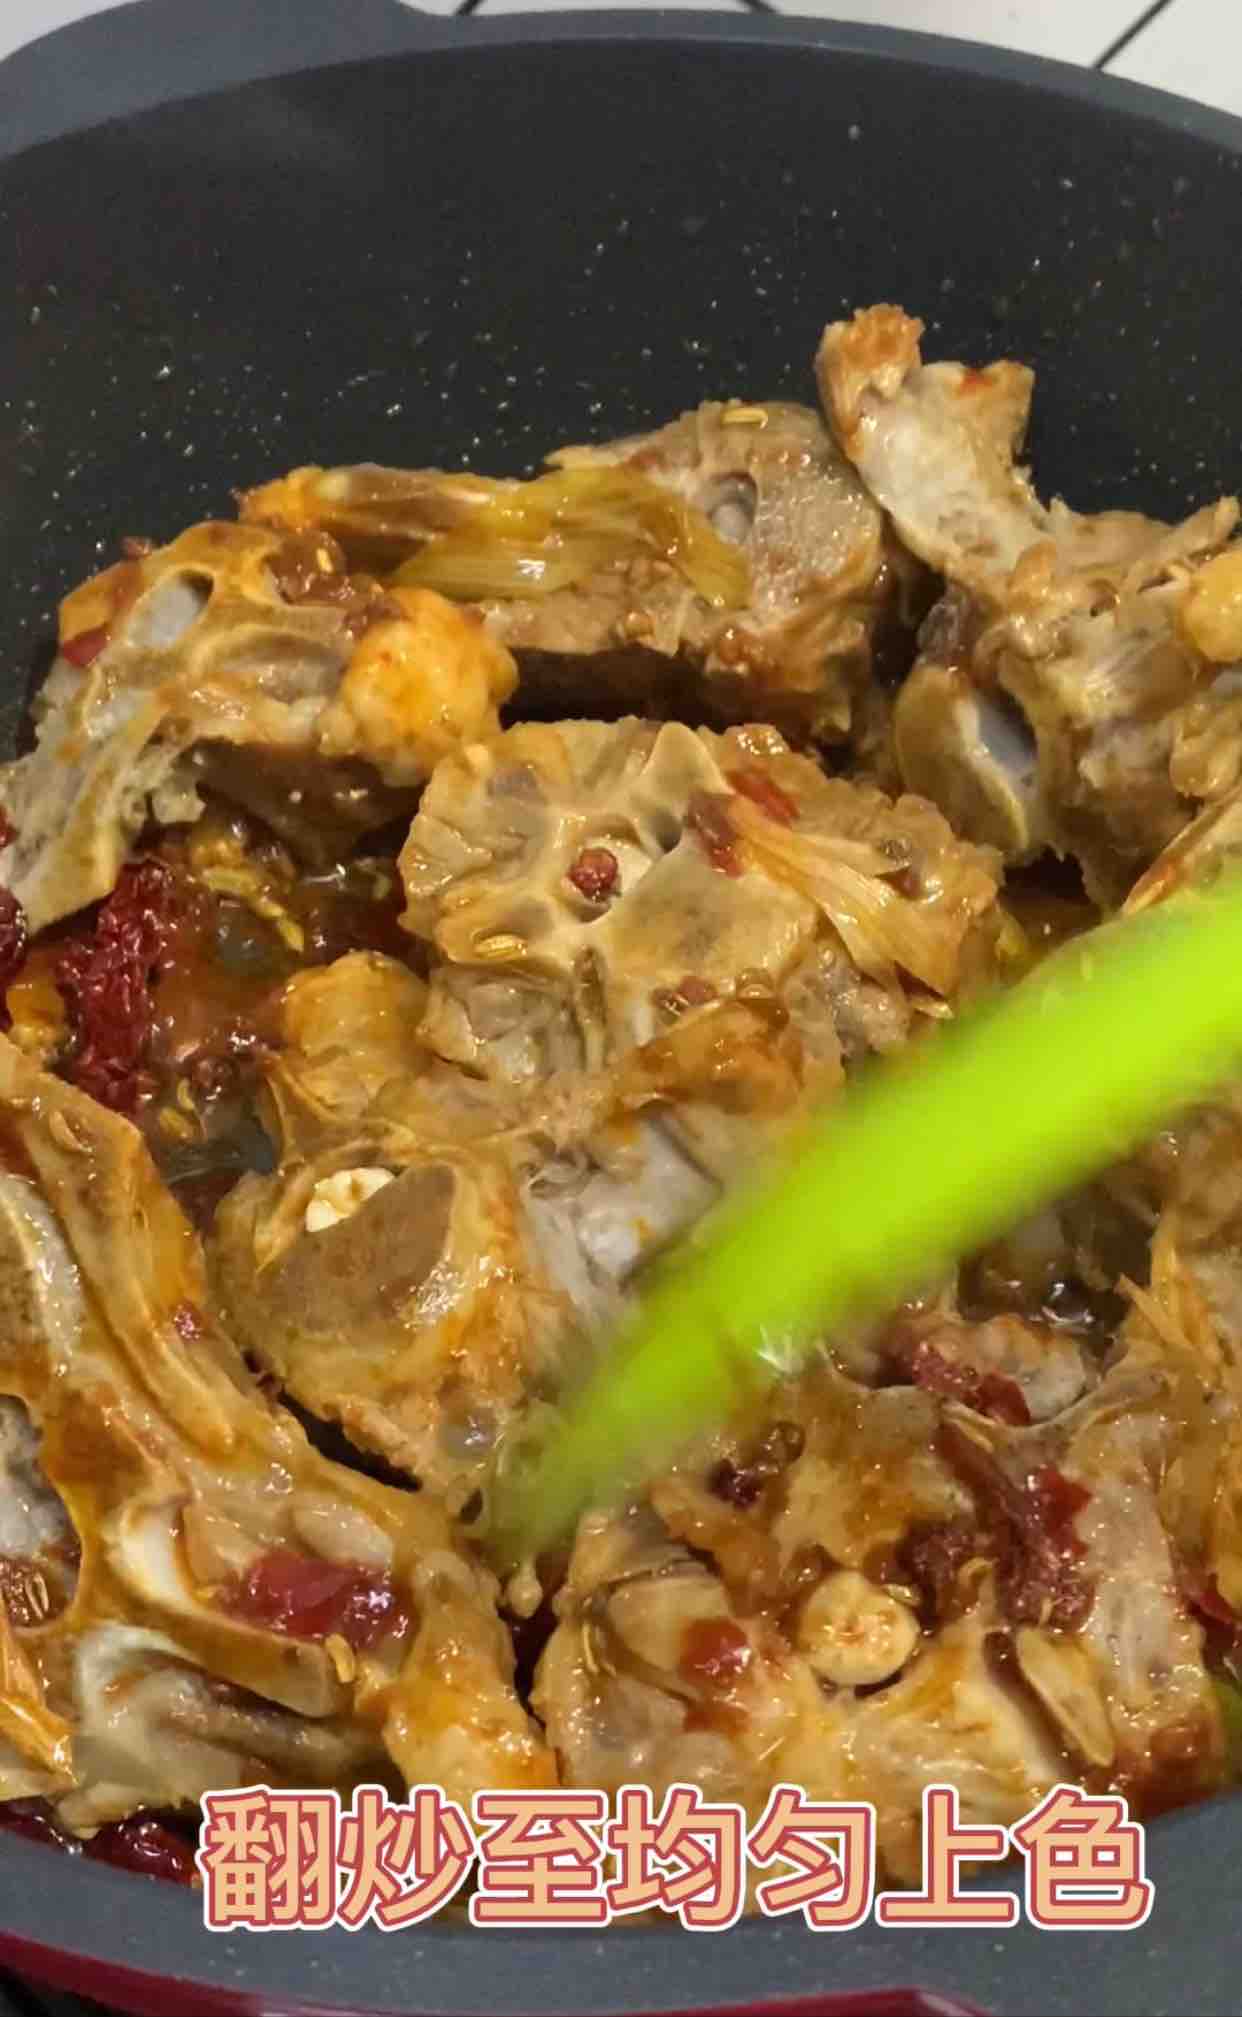 Spicy Lamb Scorpion, It’s Too Expensive for Rice recipe